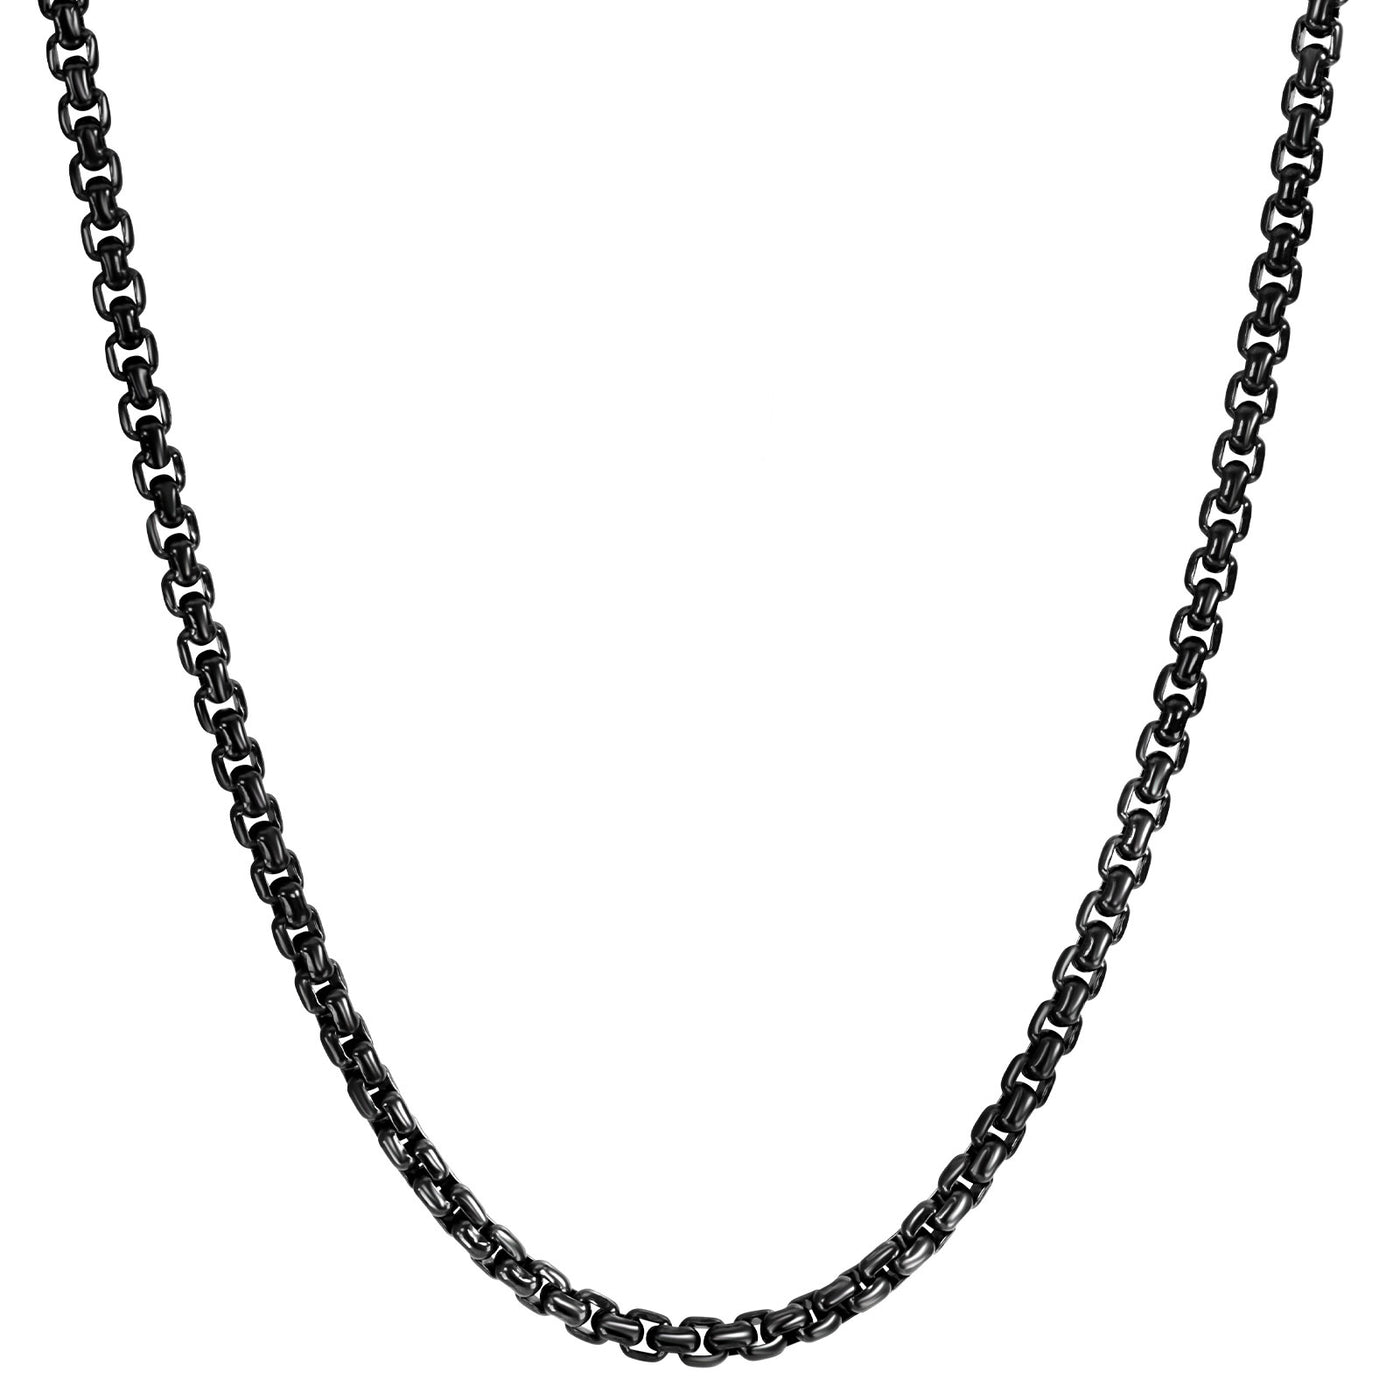 4mm Stainless Steel Black Chain